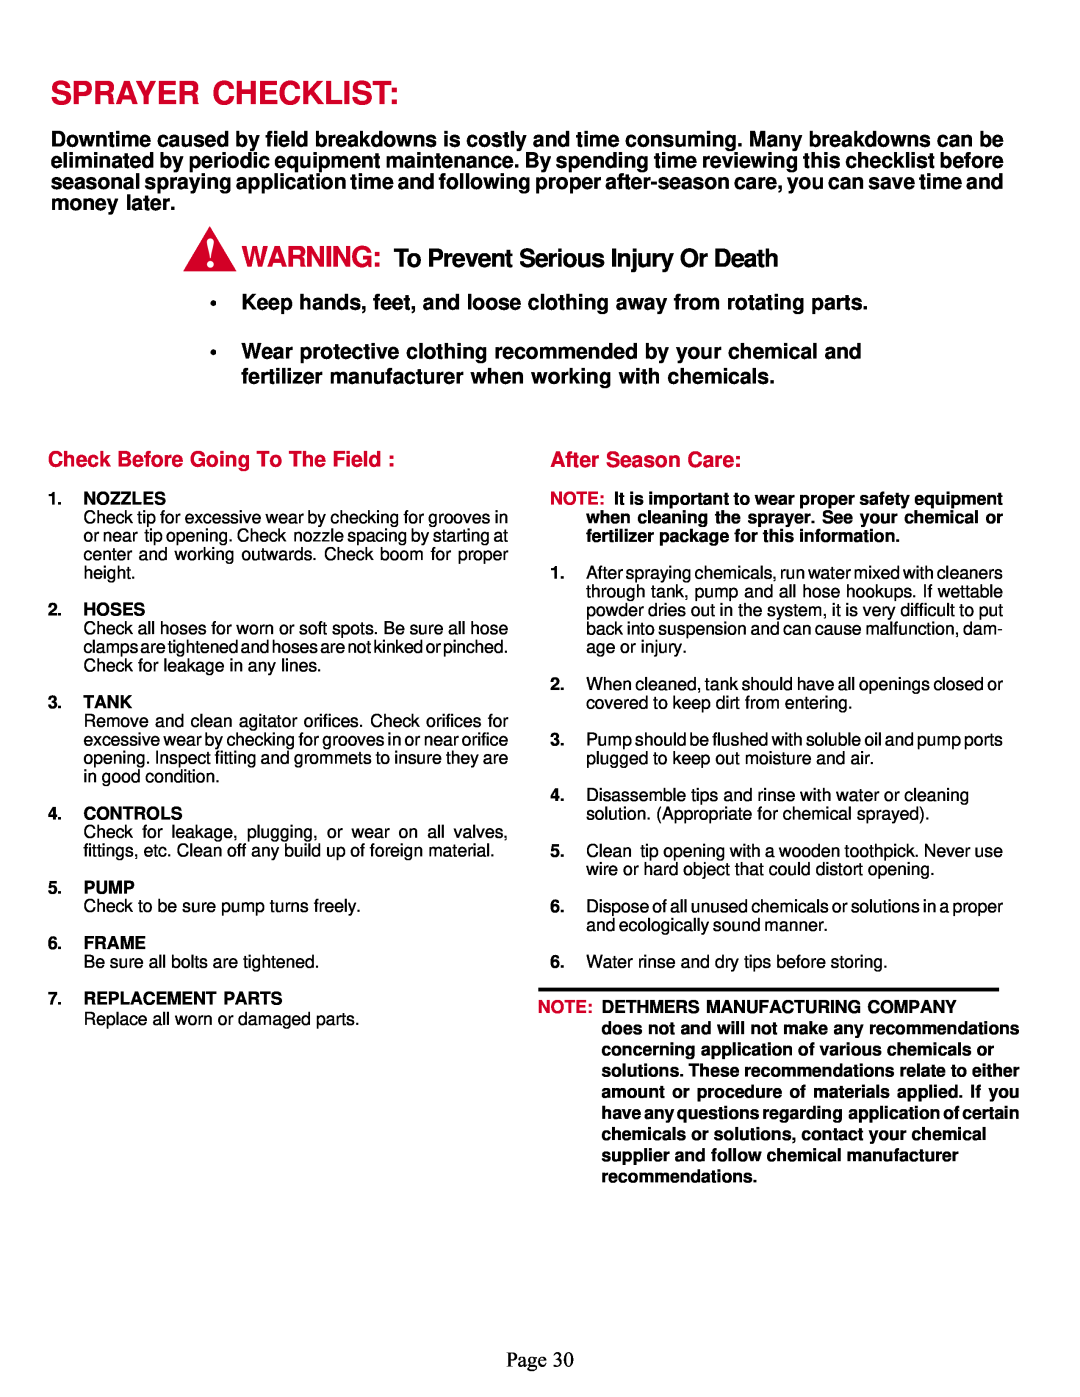 Demco Sprayer Checklist, WARNING To Prevent Serious Injury Or Death, Check Before Going To The Field, After Season Care 